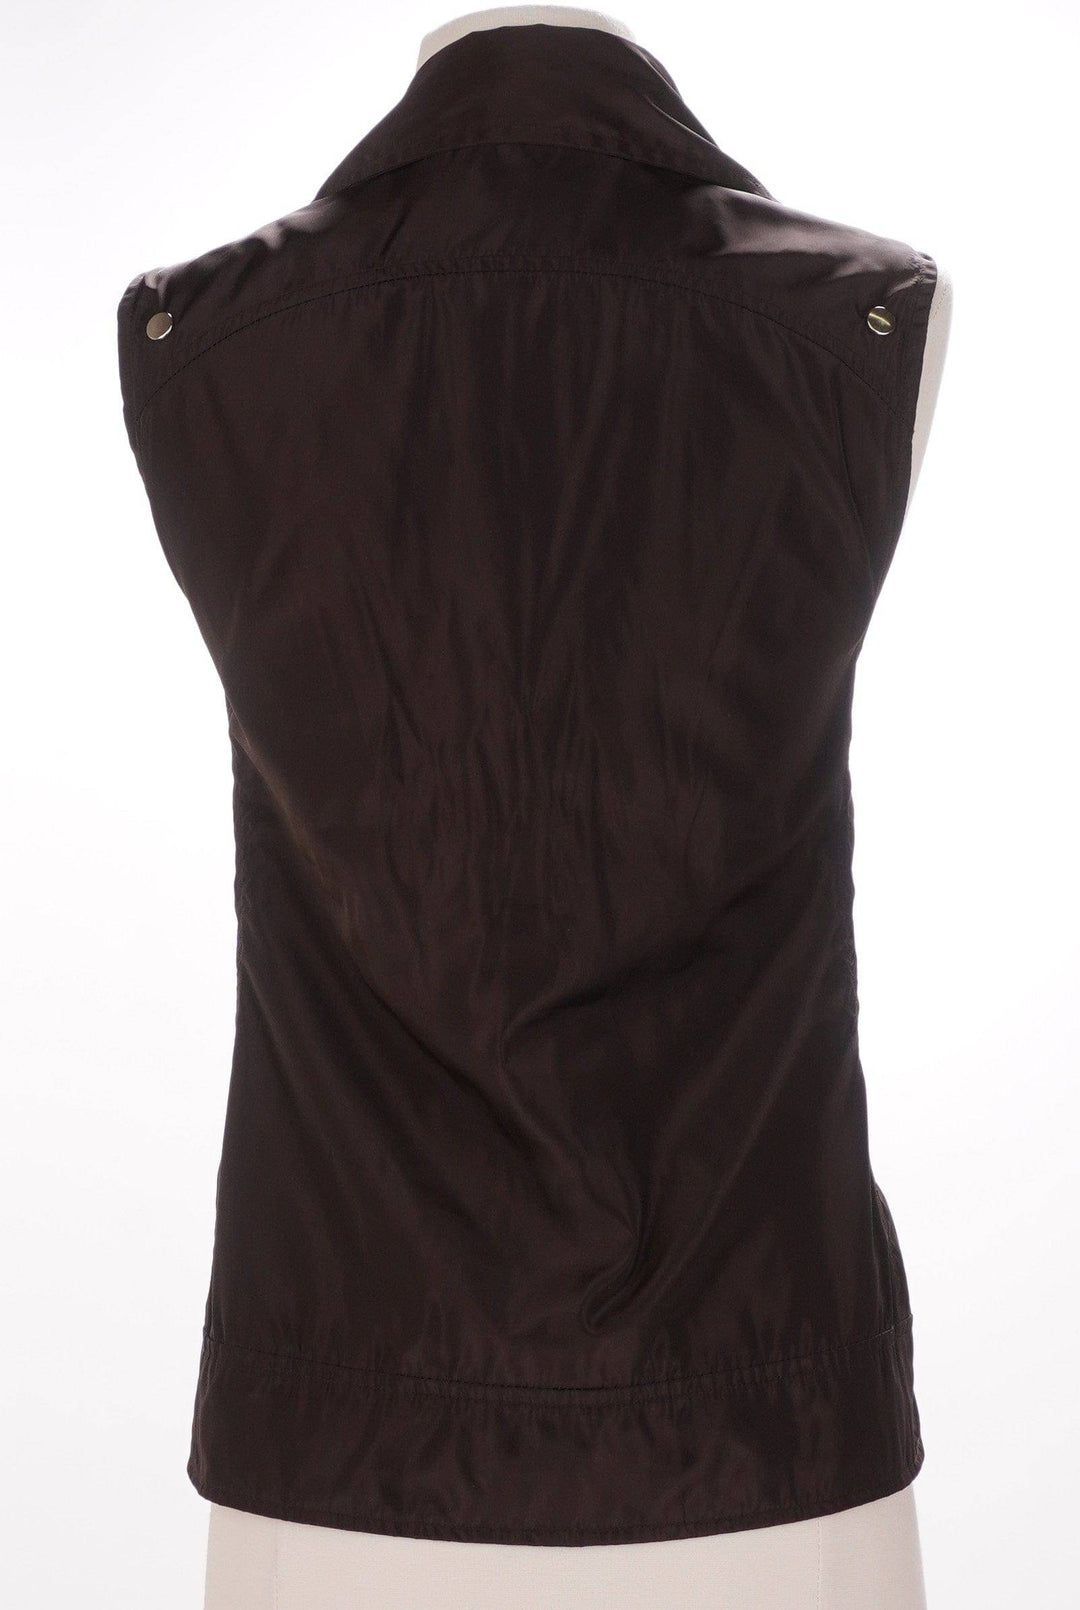 Sport Haley Brown / Small / Consigned Sport Haley Shiny Golf Vest - Brown - Size Small